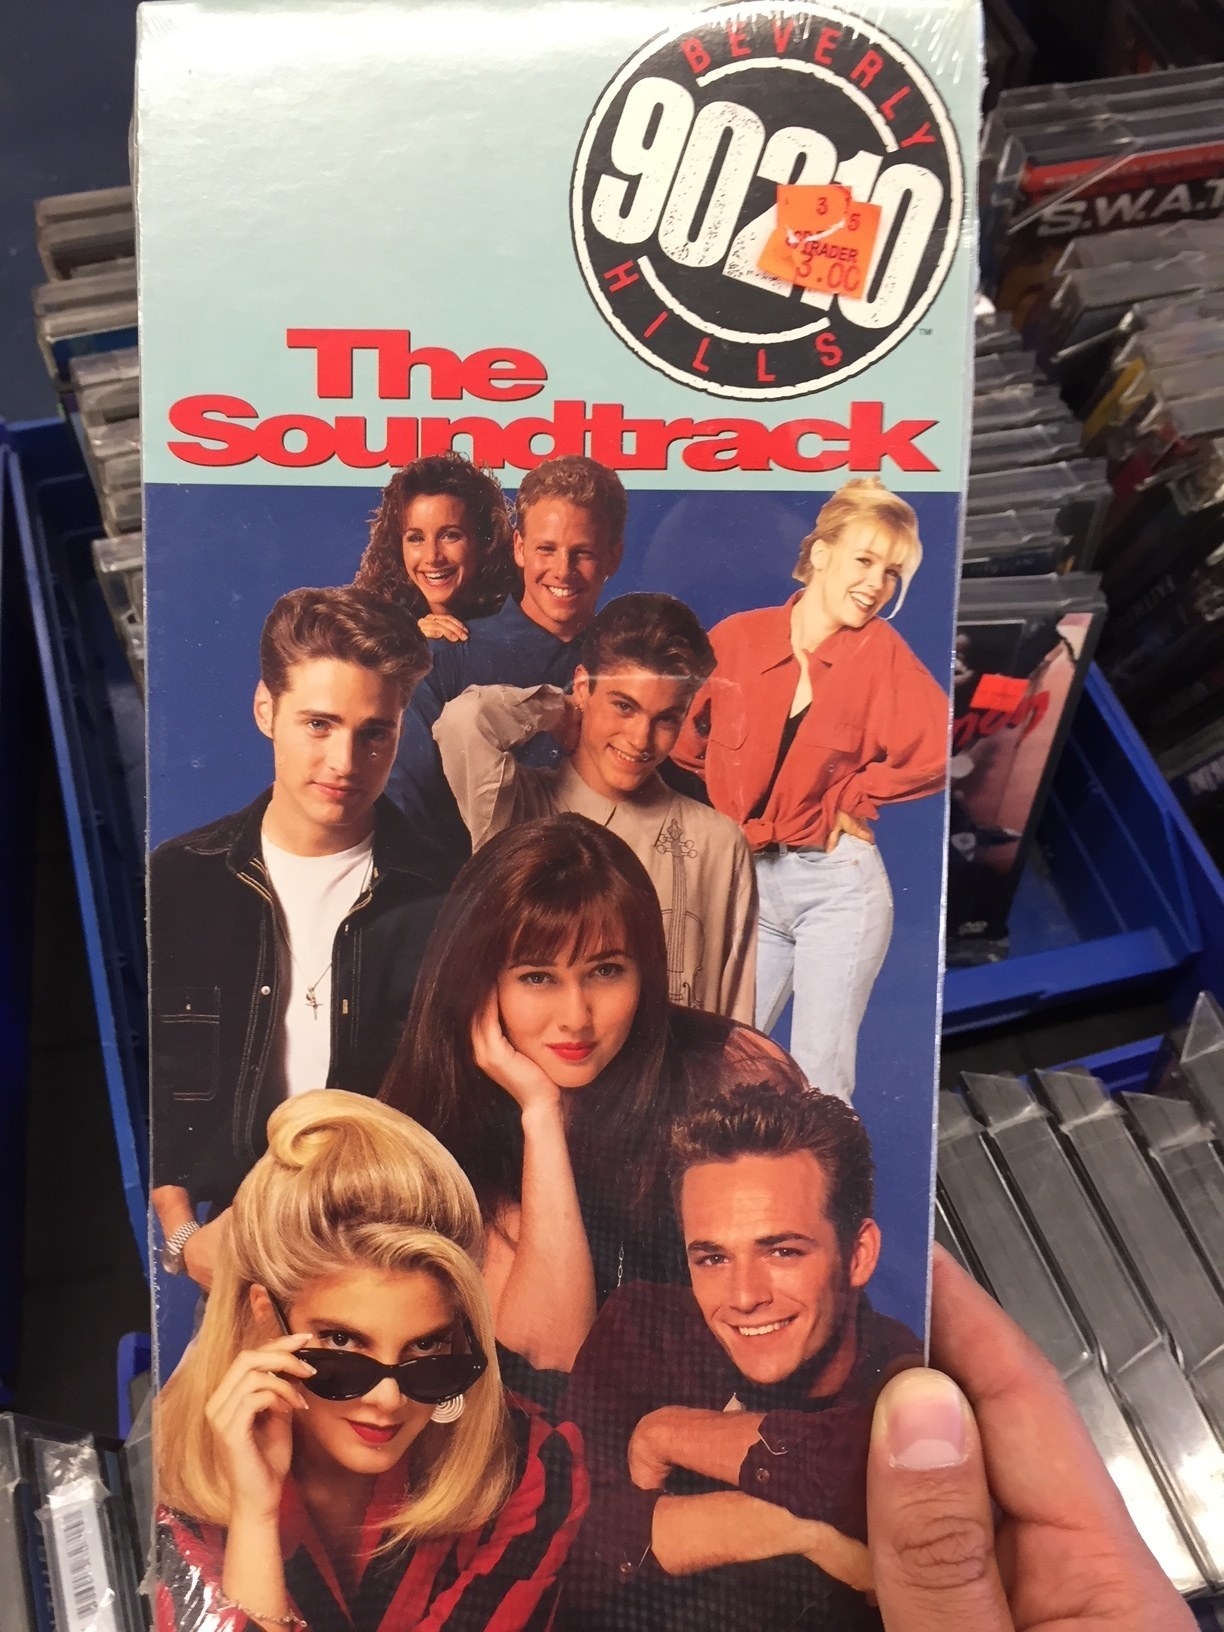 Beverly Hills 90210 soundtrack in long box